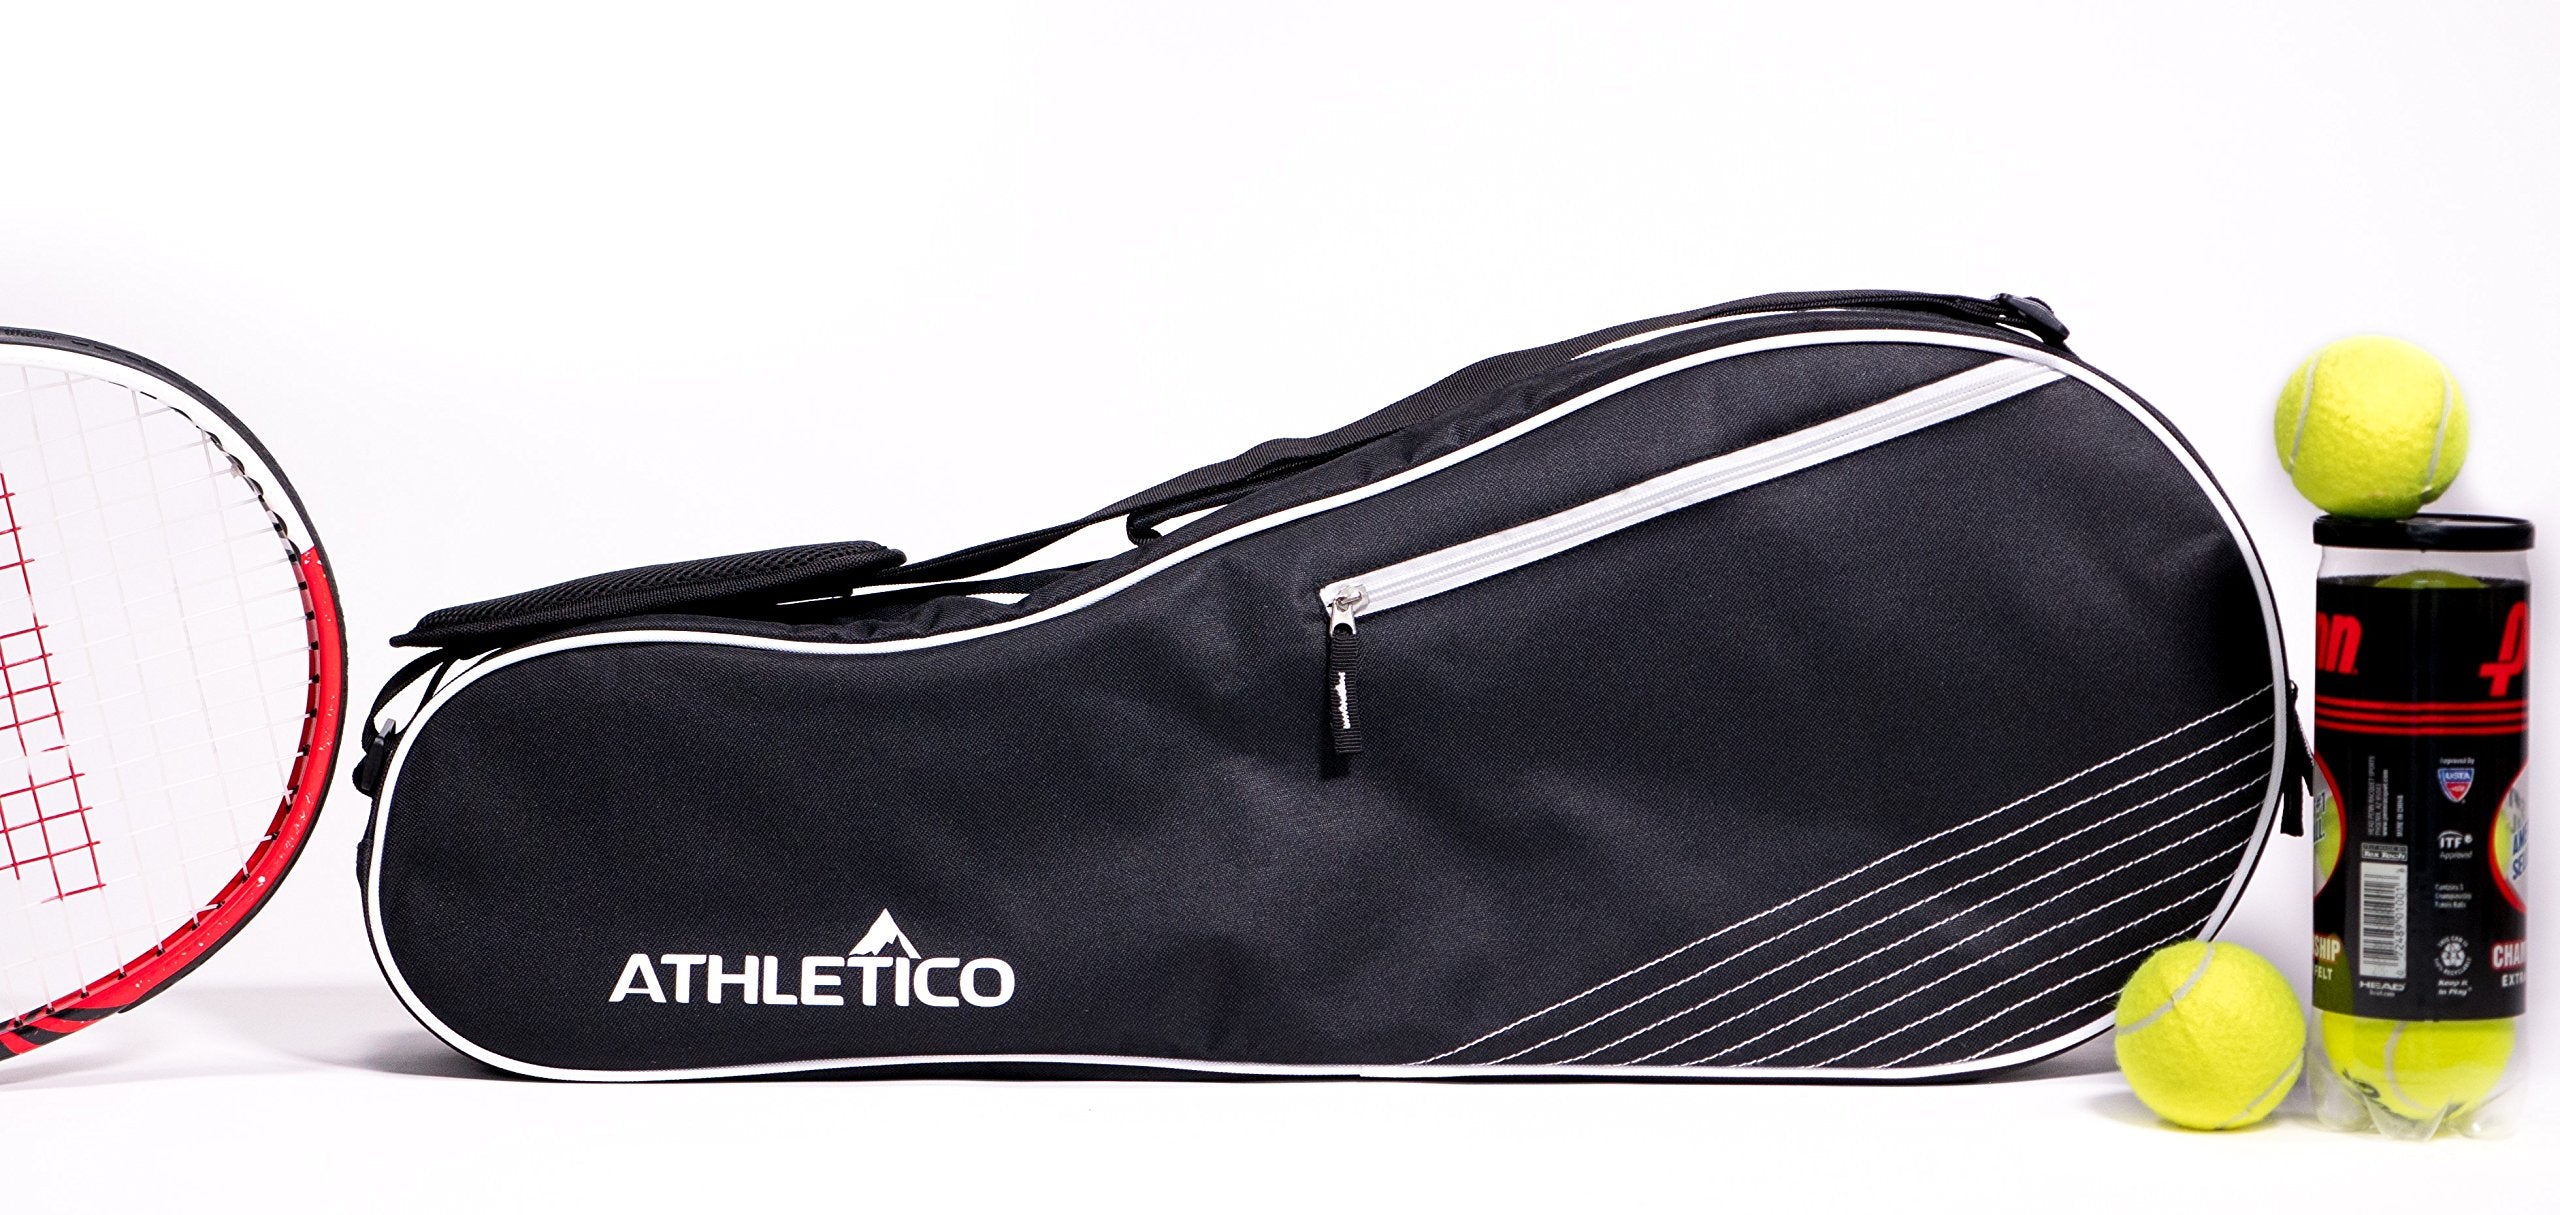 Athletico 3 Racquet Tennis Bag | Padded to Protect Rackets & Lightweight | Professional or Beginner Tennis Players | Unisex Design for Men, Women, Youth and Adults  - Acceptable